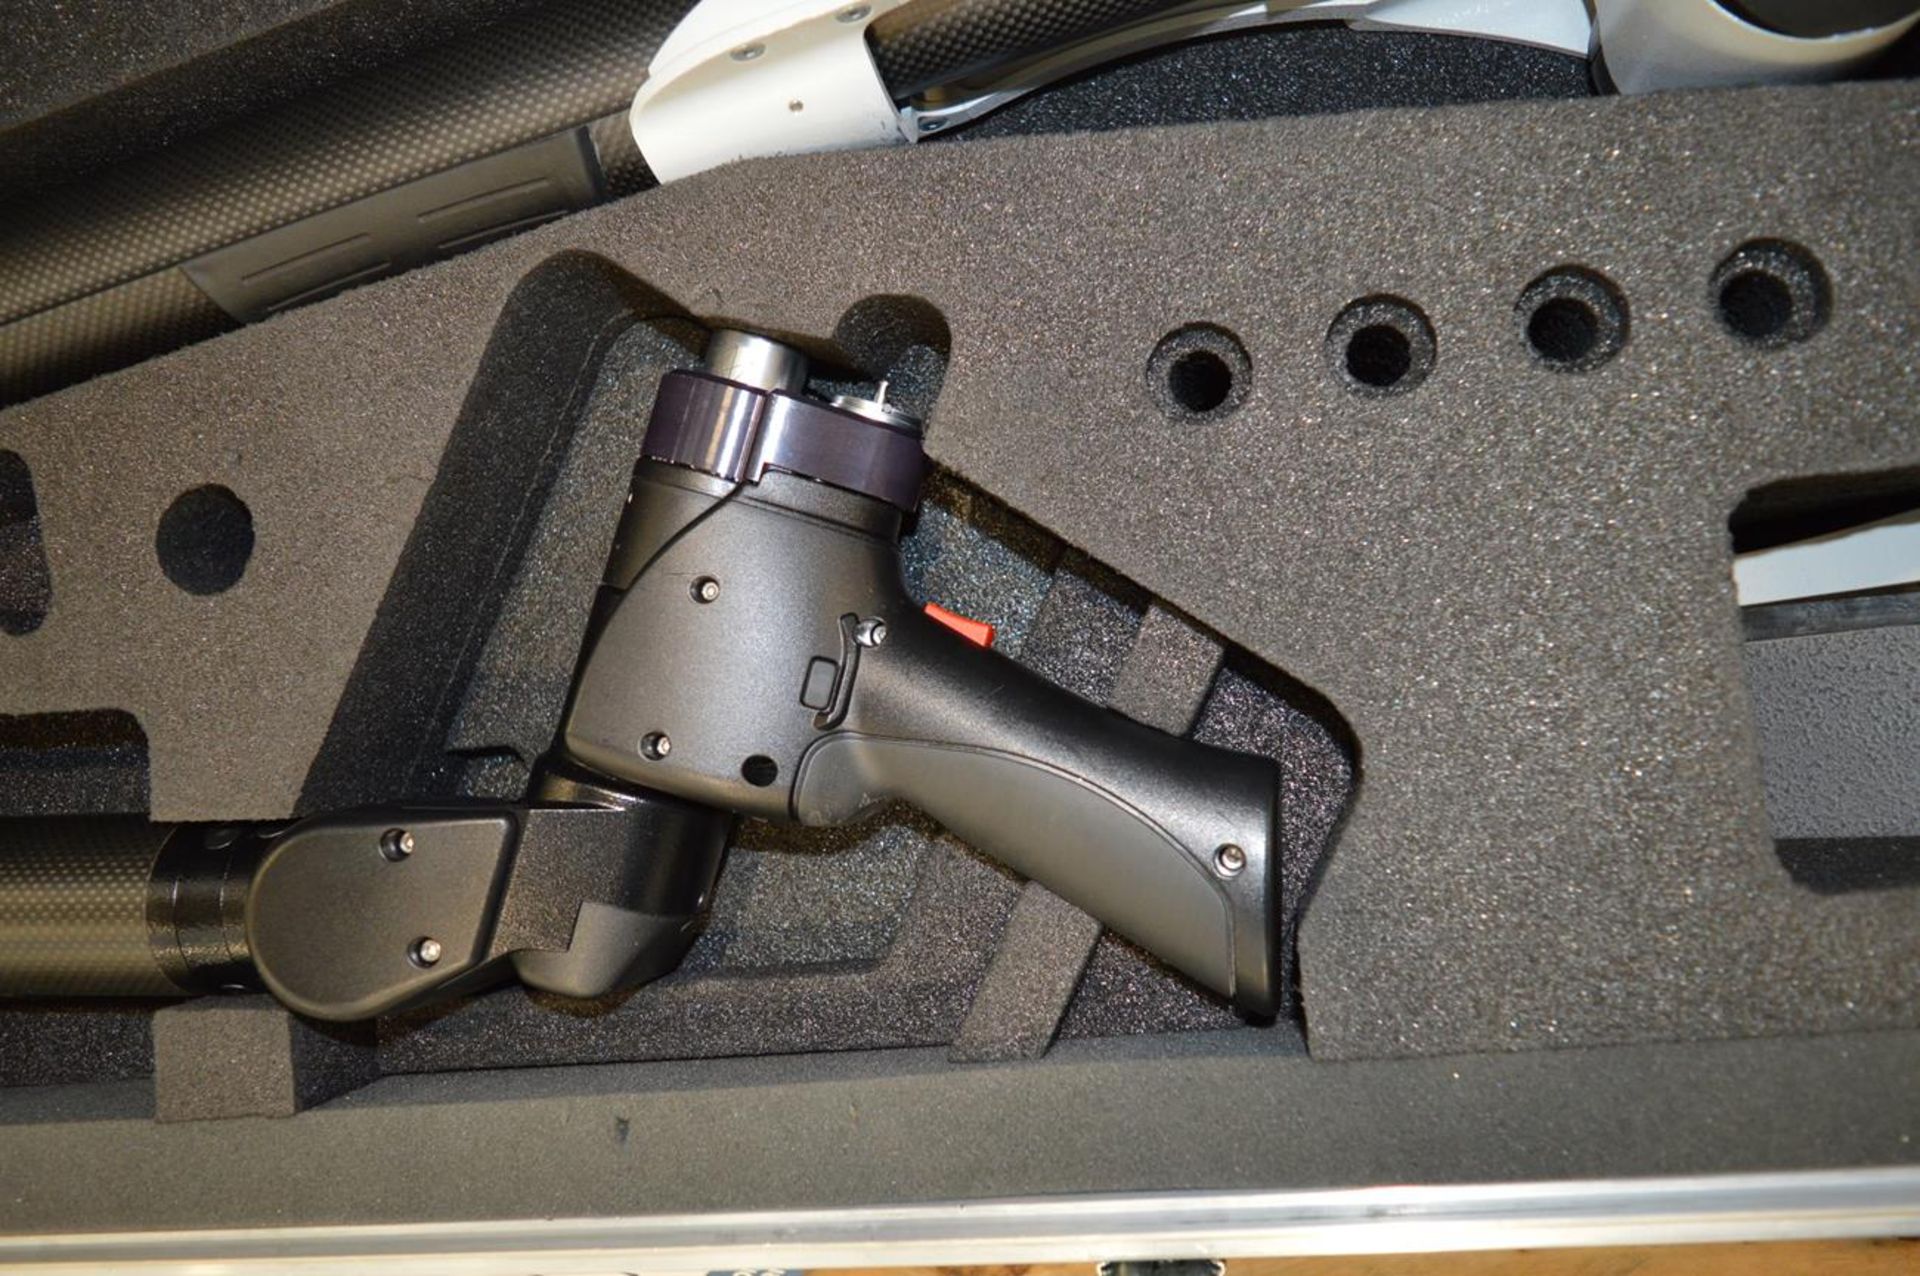 Nikon, MCAX35 portable area CMM (seven axis measuring arm) with articulated arm, Serial No. 76355E43 - Image 3 of 4